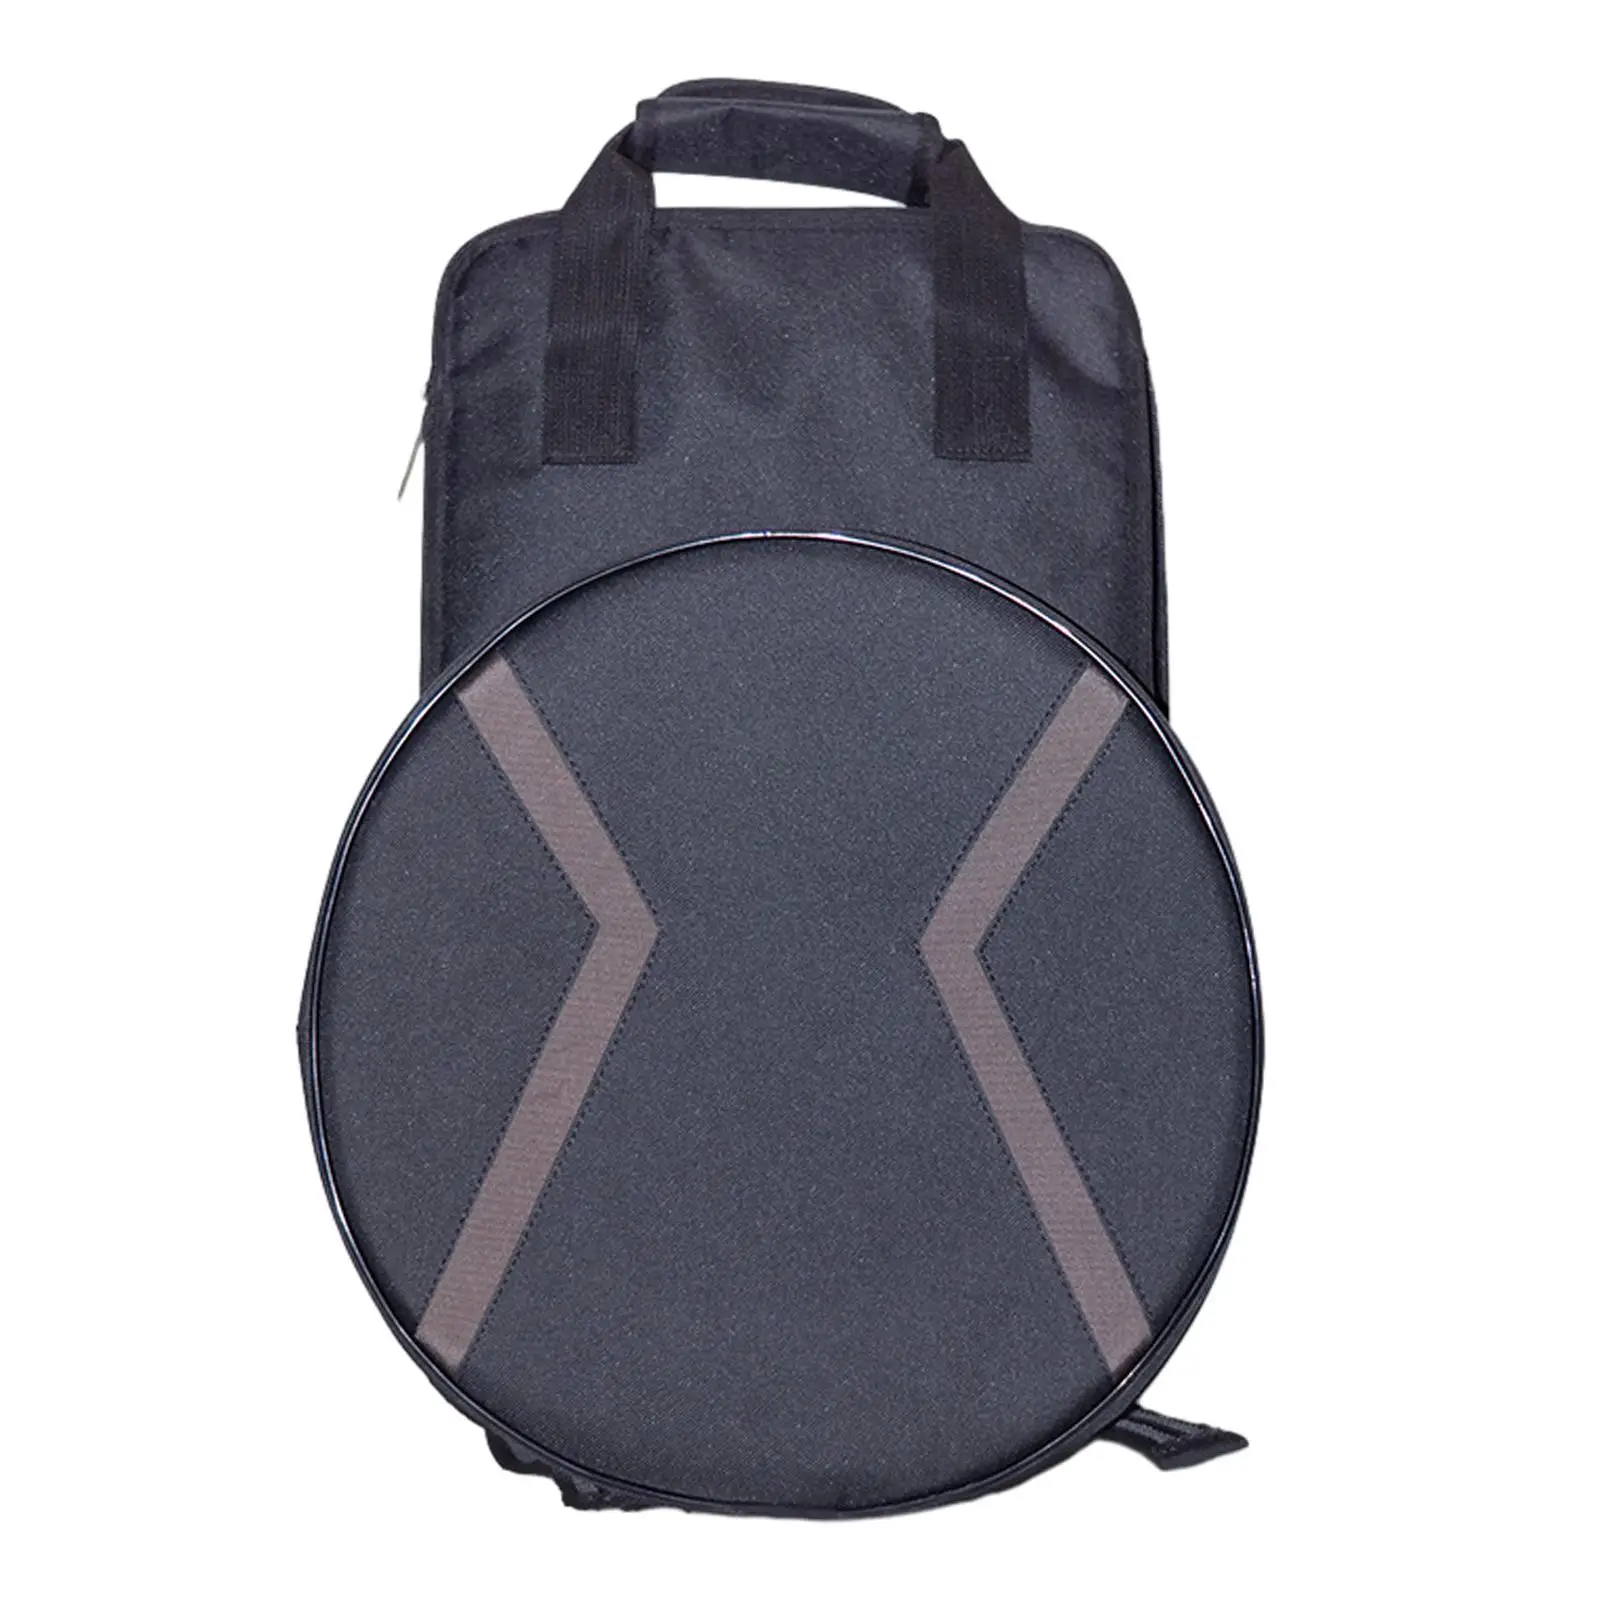 Dumb Drum Bag Waterproof Durable Backpack Easy to Carry Pad Bag for Professional Musician Tour Home Stage Performance